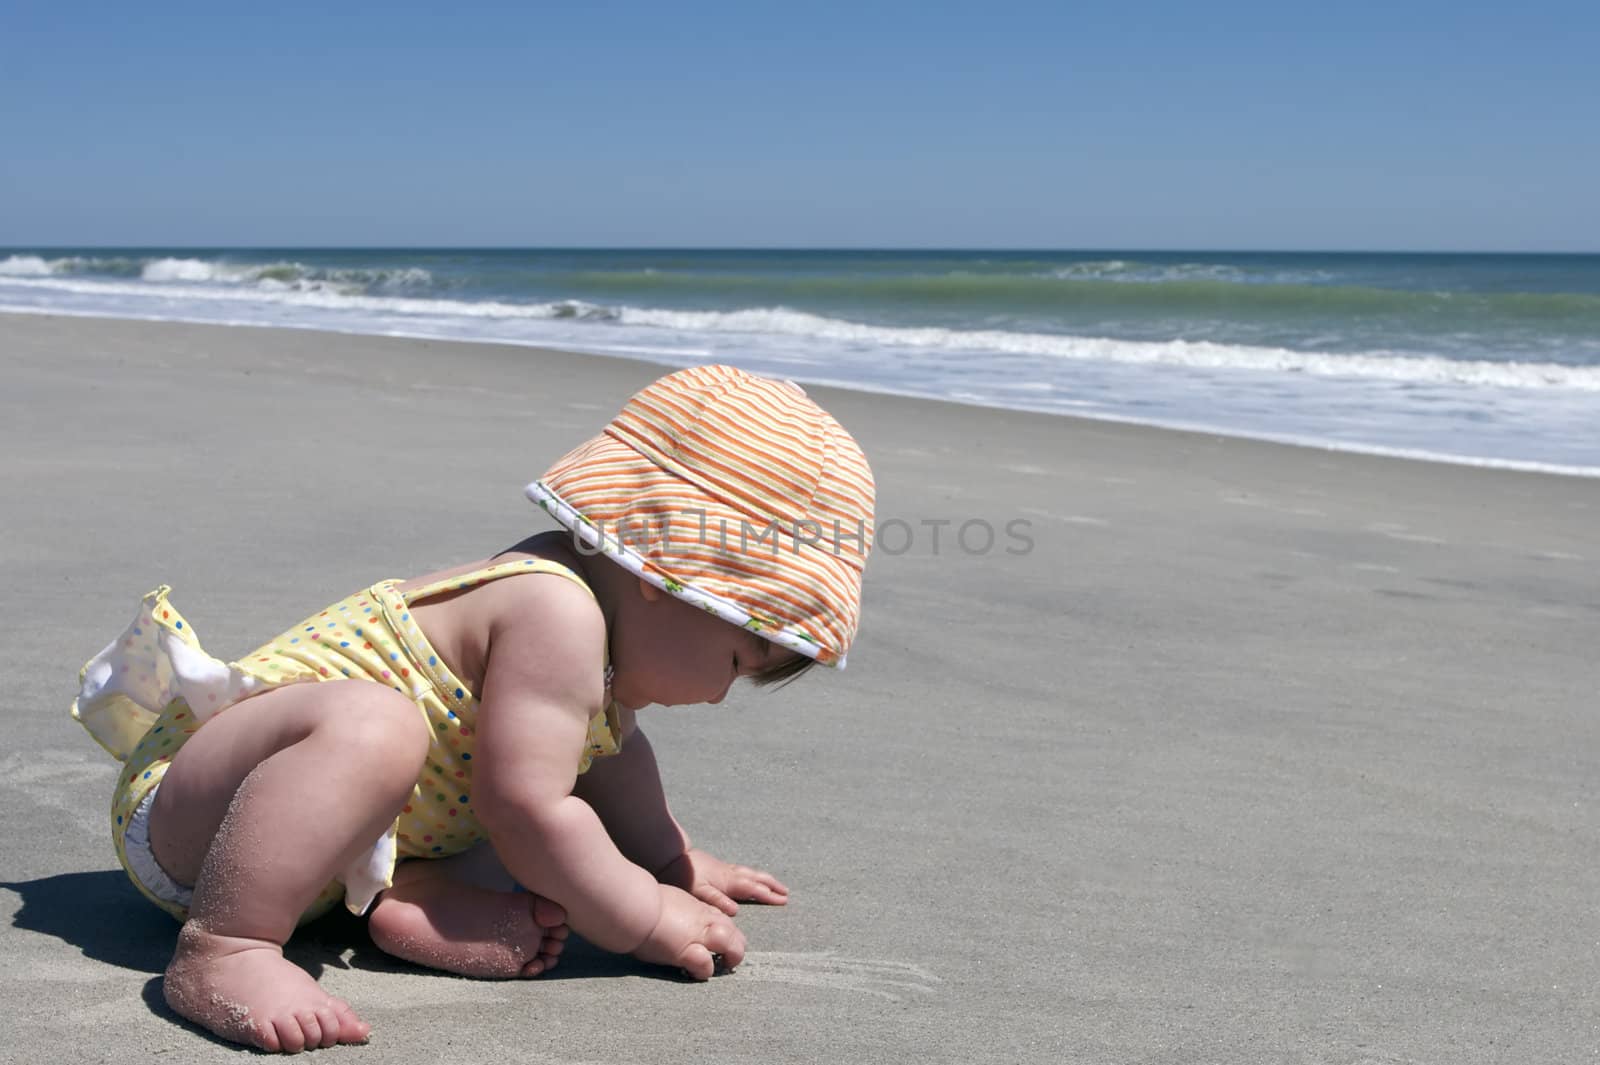 A baby plays with the sand during her first visit to the beach.